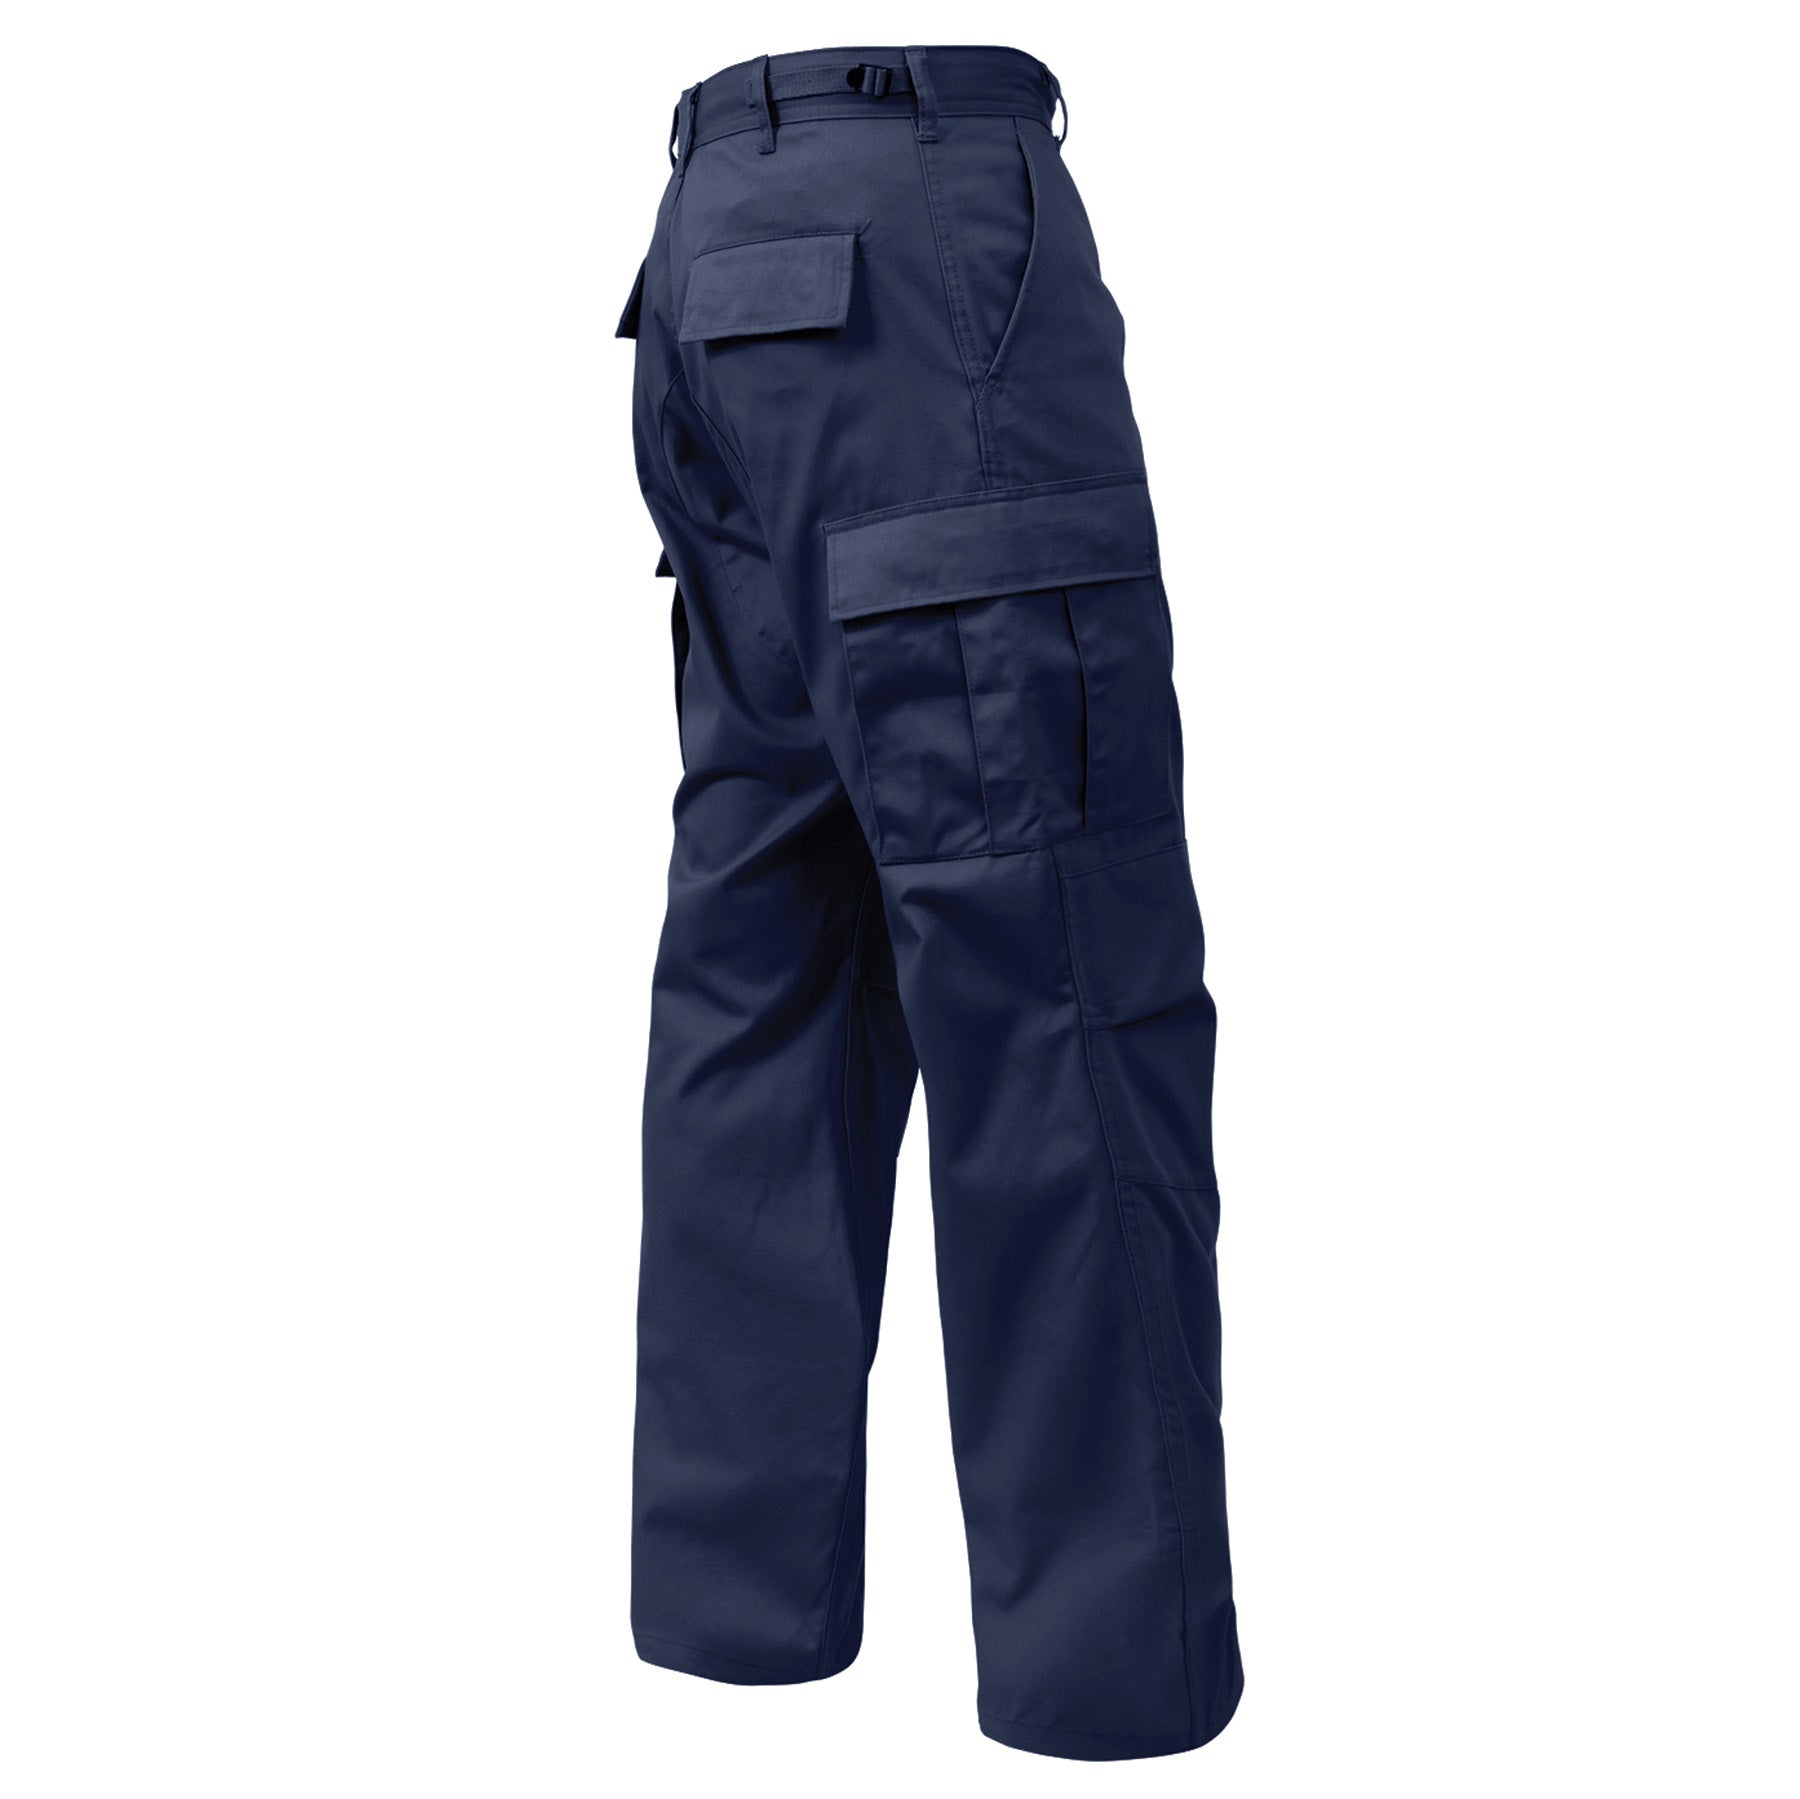 [Relaxed Fit Zipper Fly] Poly/Cotton Tactical BDU Pants Midnight Navy Blue